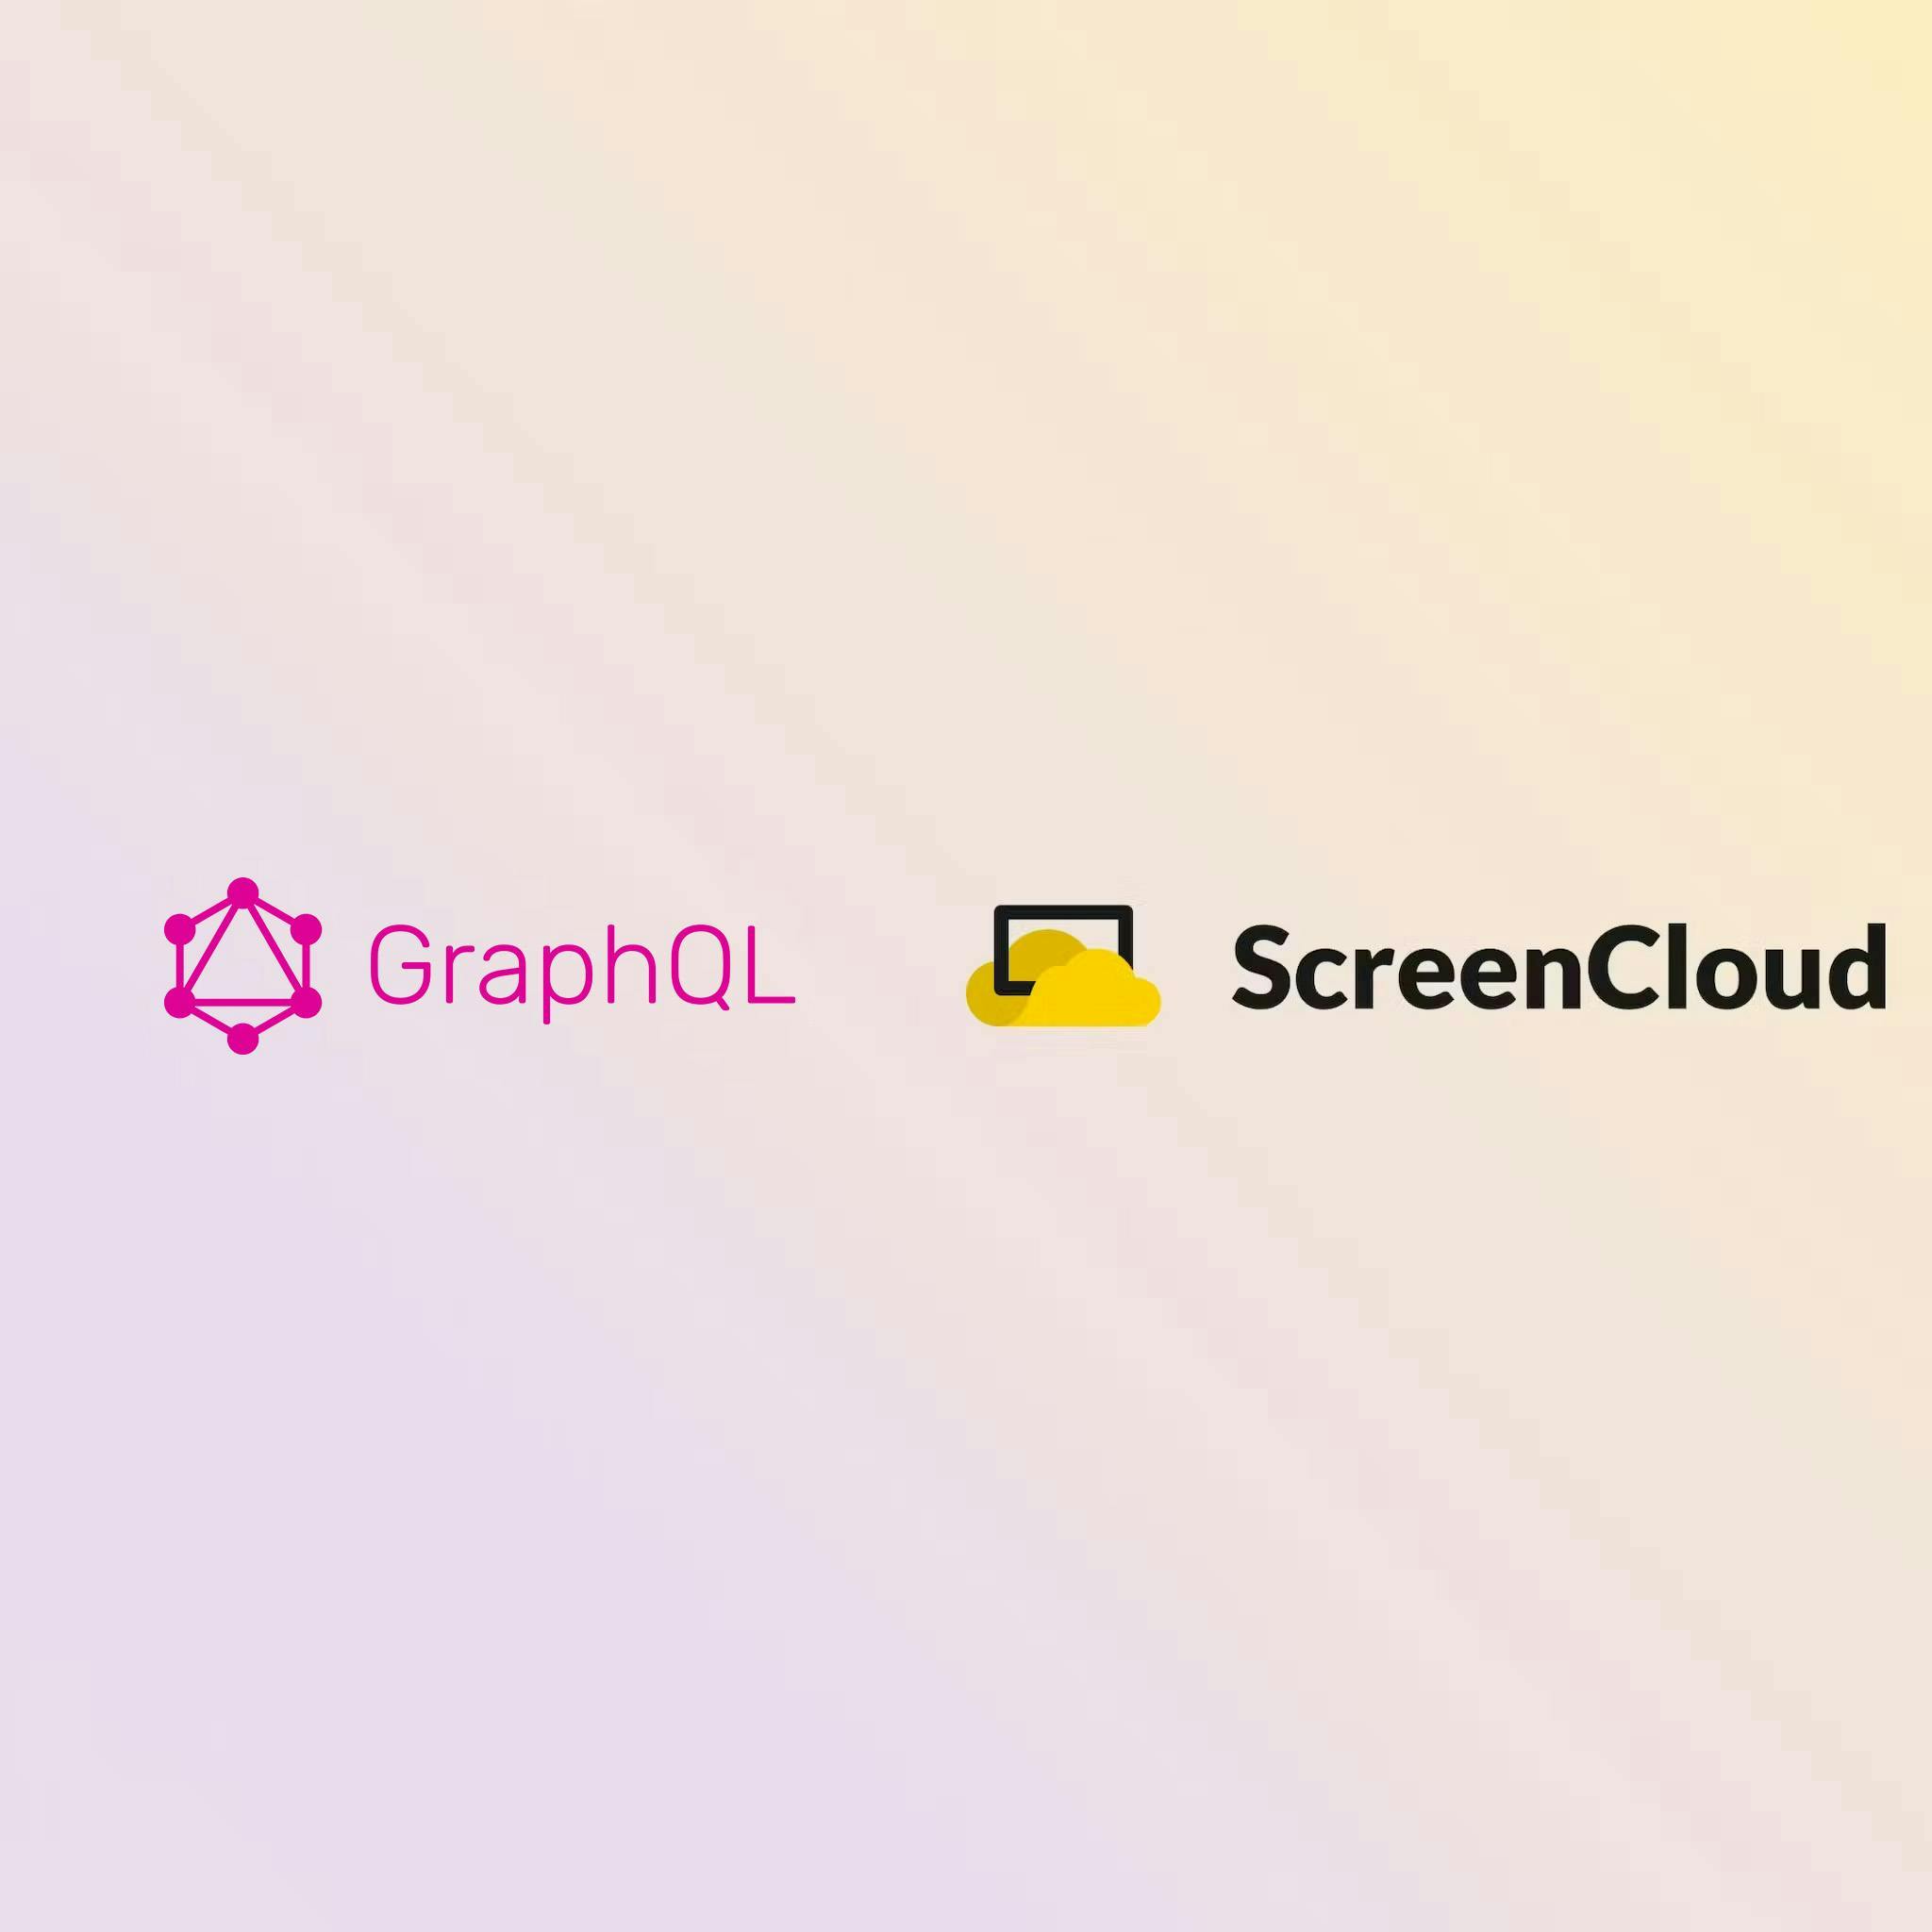 ScreenCloud Article - A Beginner’s Guide to GraphQL API Queries and Mutations